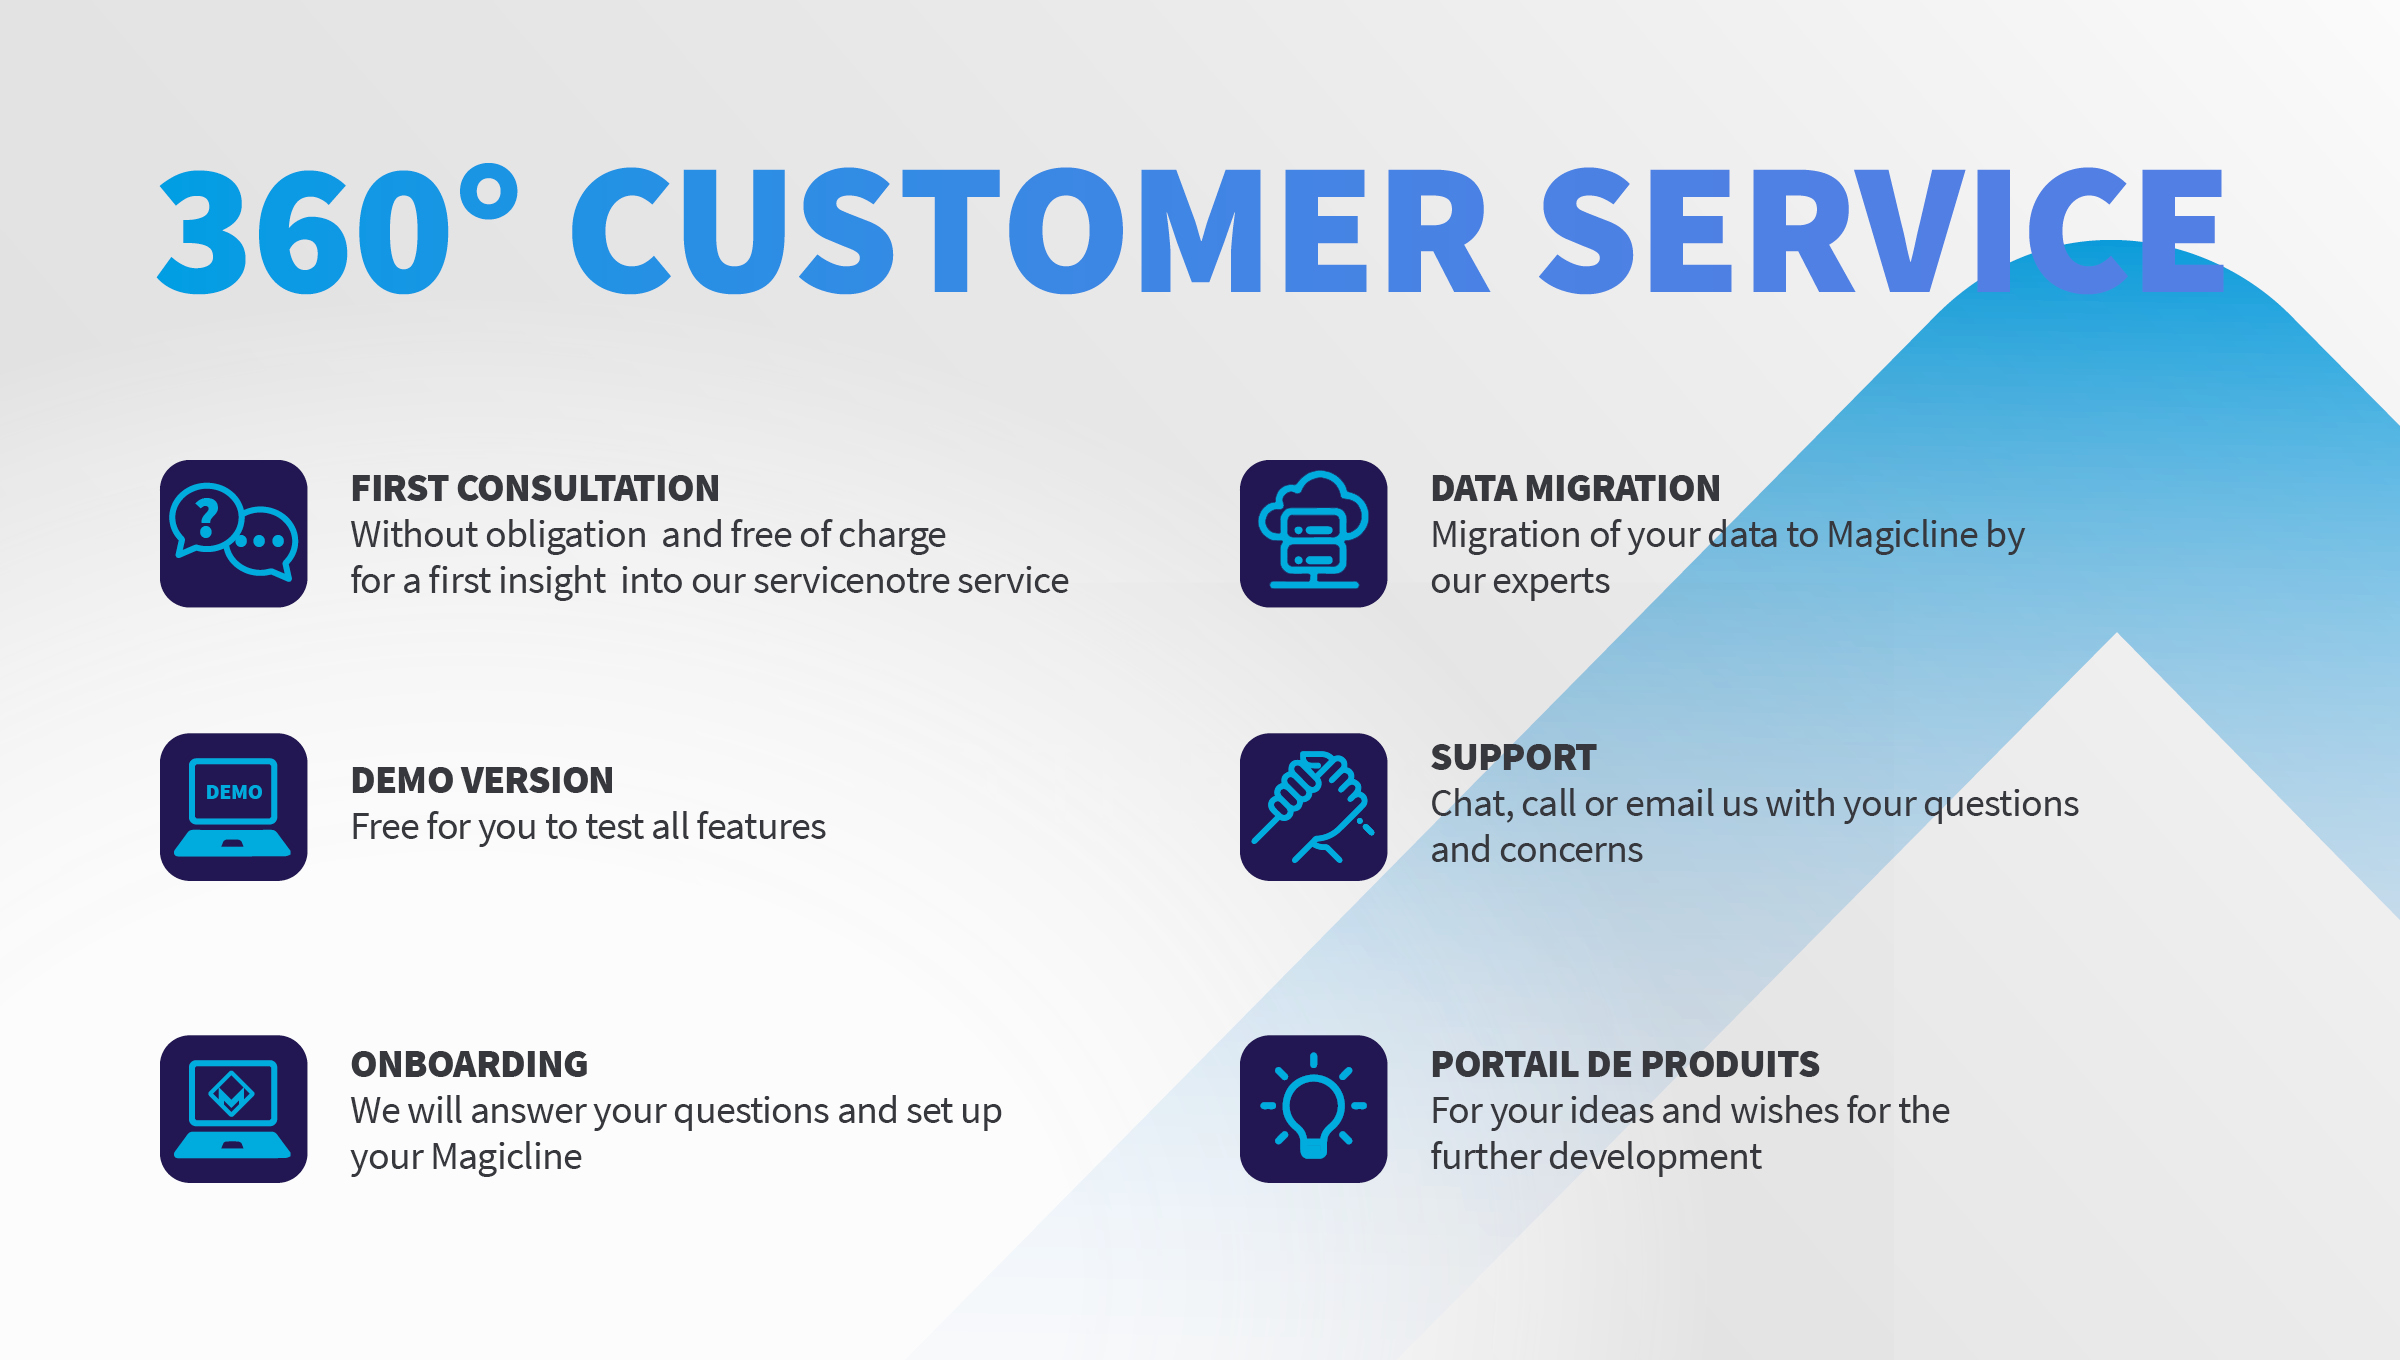 Our 360° customer service for you.